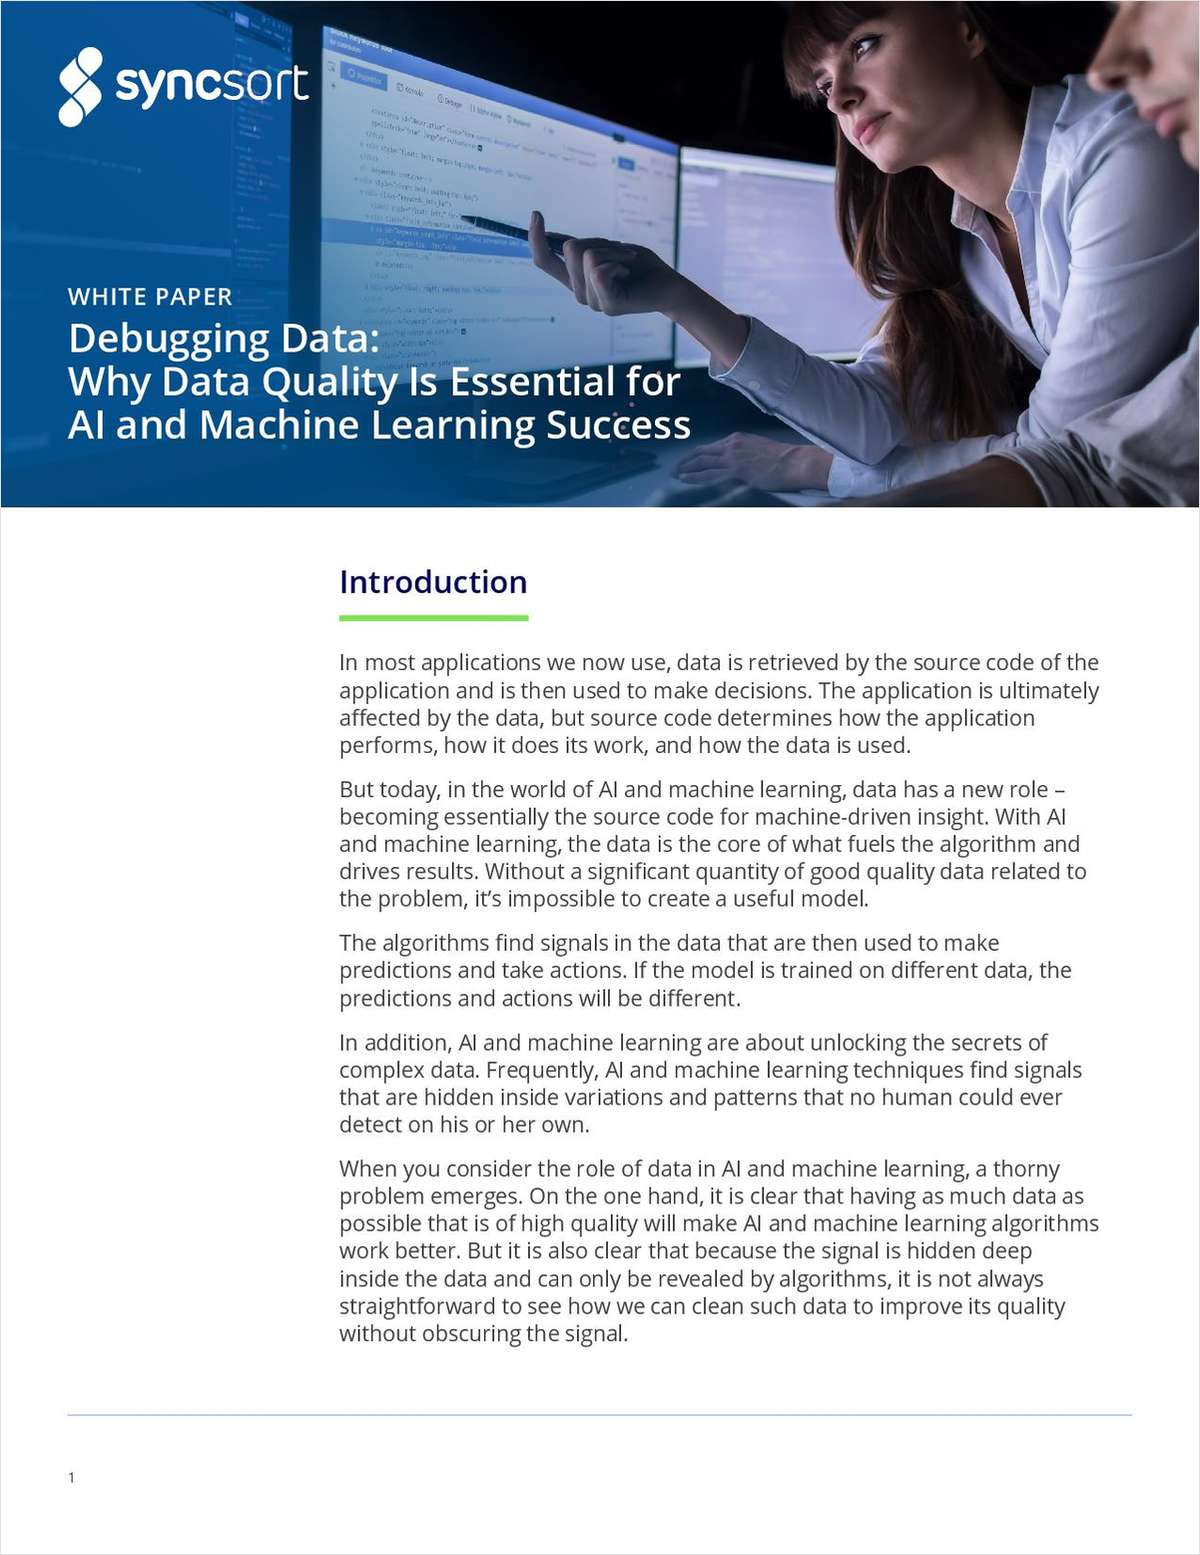 Learn Why Data Quality is Essential for AI and Machine Learning Success